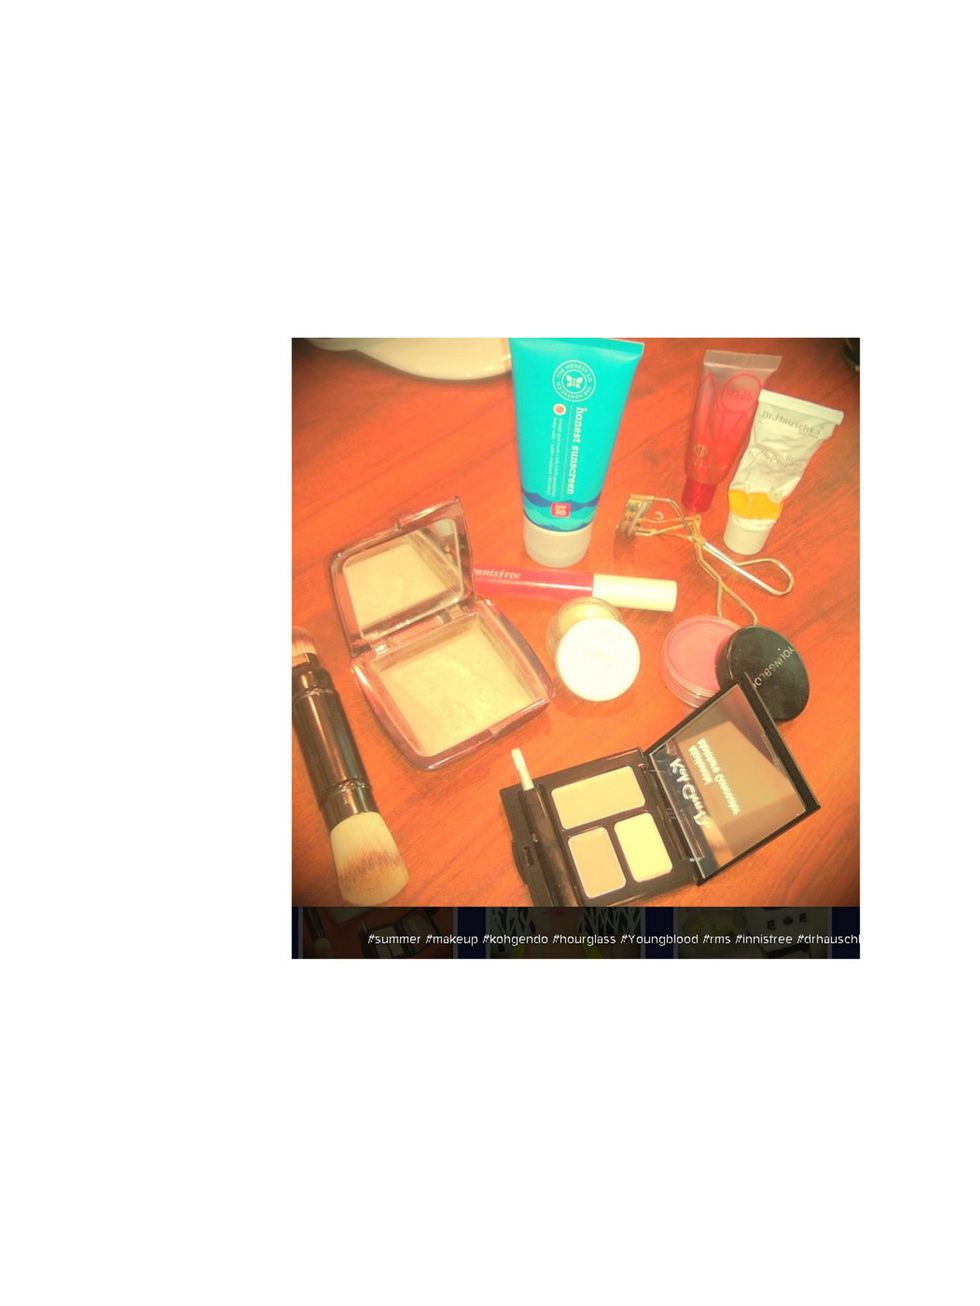 <p>Jessica Alba hasn't just shared on product, she's shared her whole make-up bag on her Instagram page.</p><p>We spy Youngblood, Dr Hauschka, Shu Uemura and her very own Honest Company sunscreen.</p>